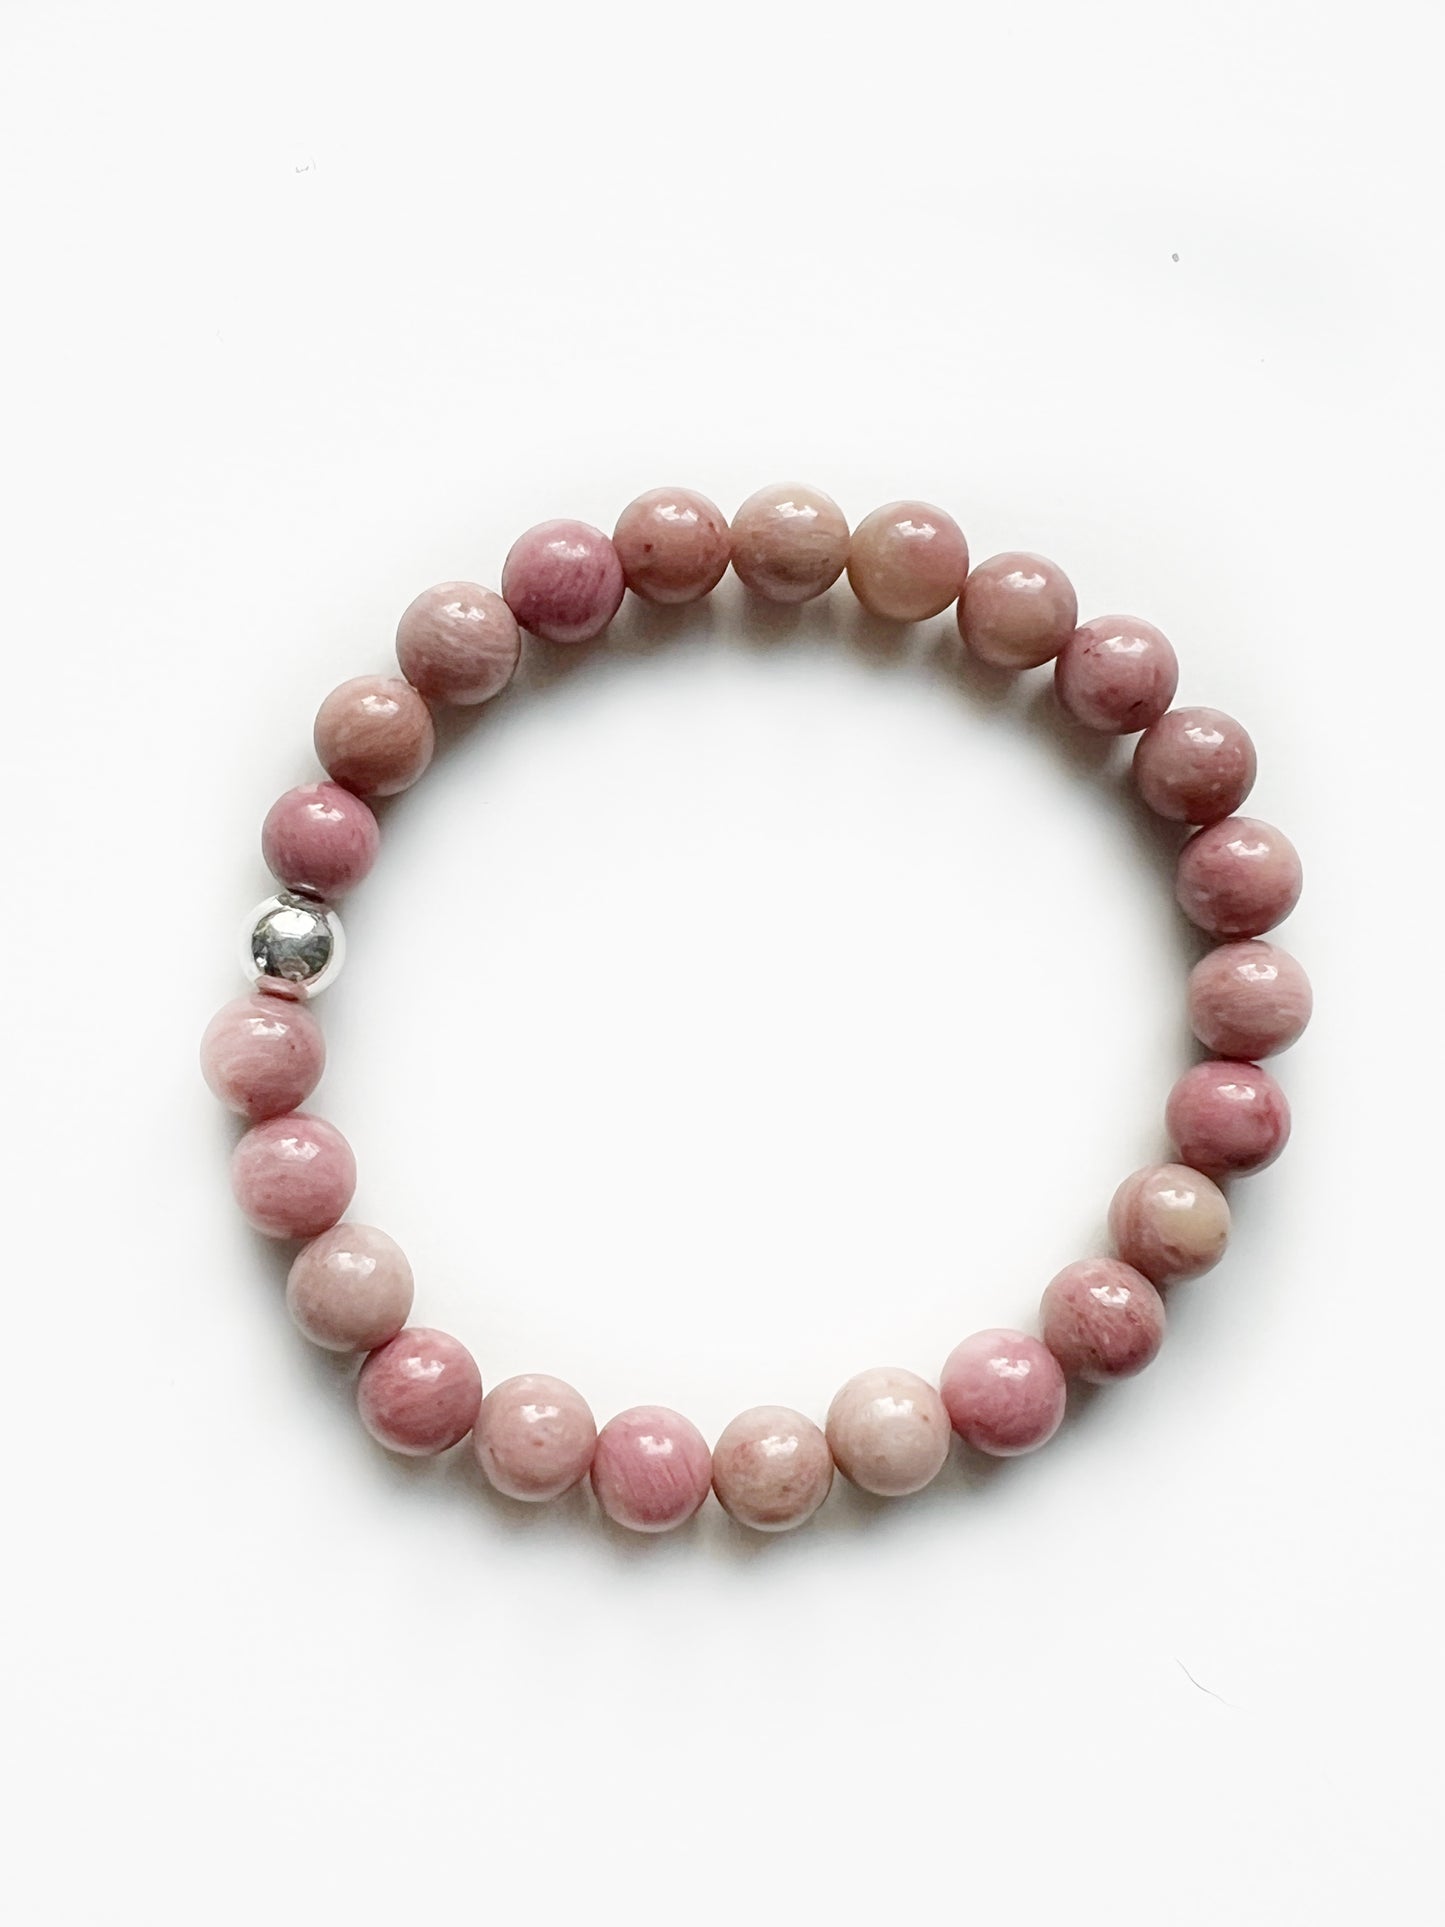 Rhodonite stretch bracelet, opaque baby pink, with one silver bead on a white background